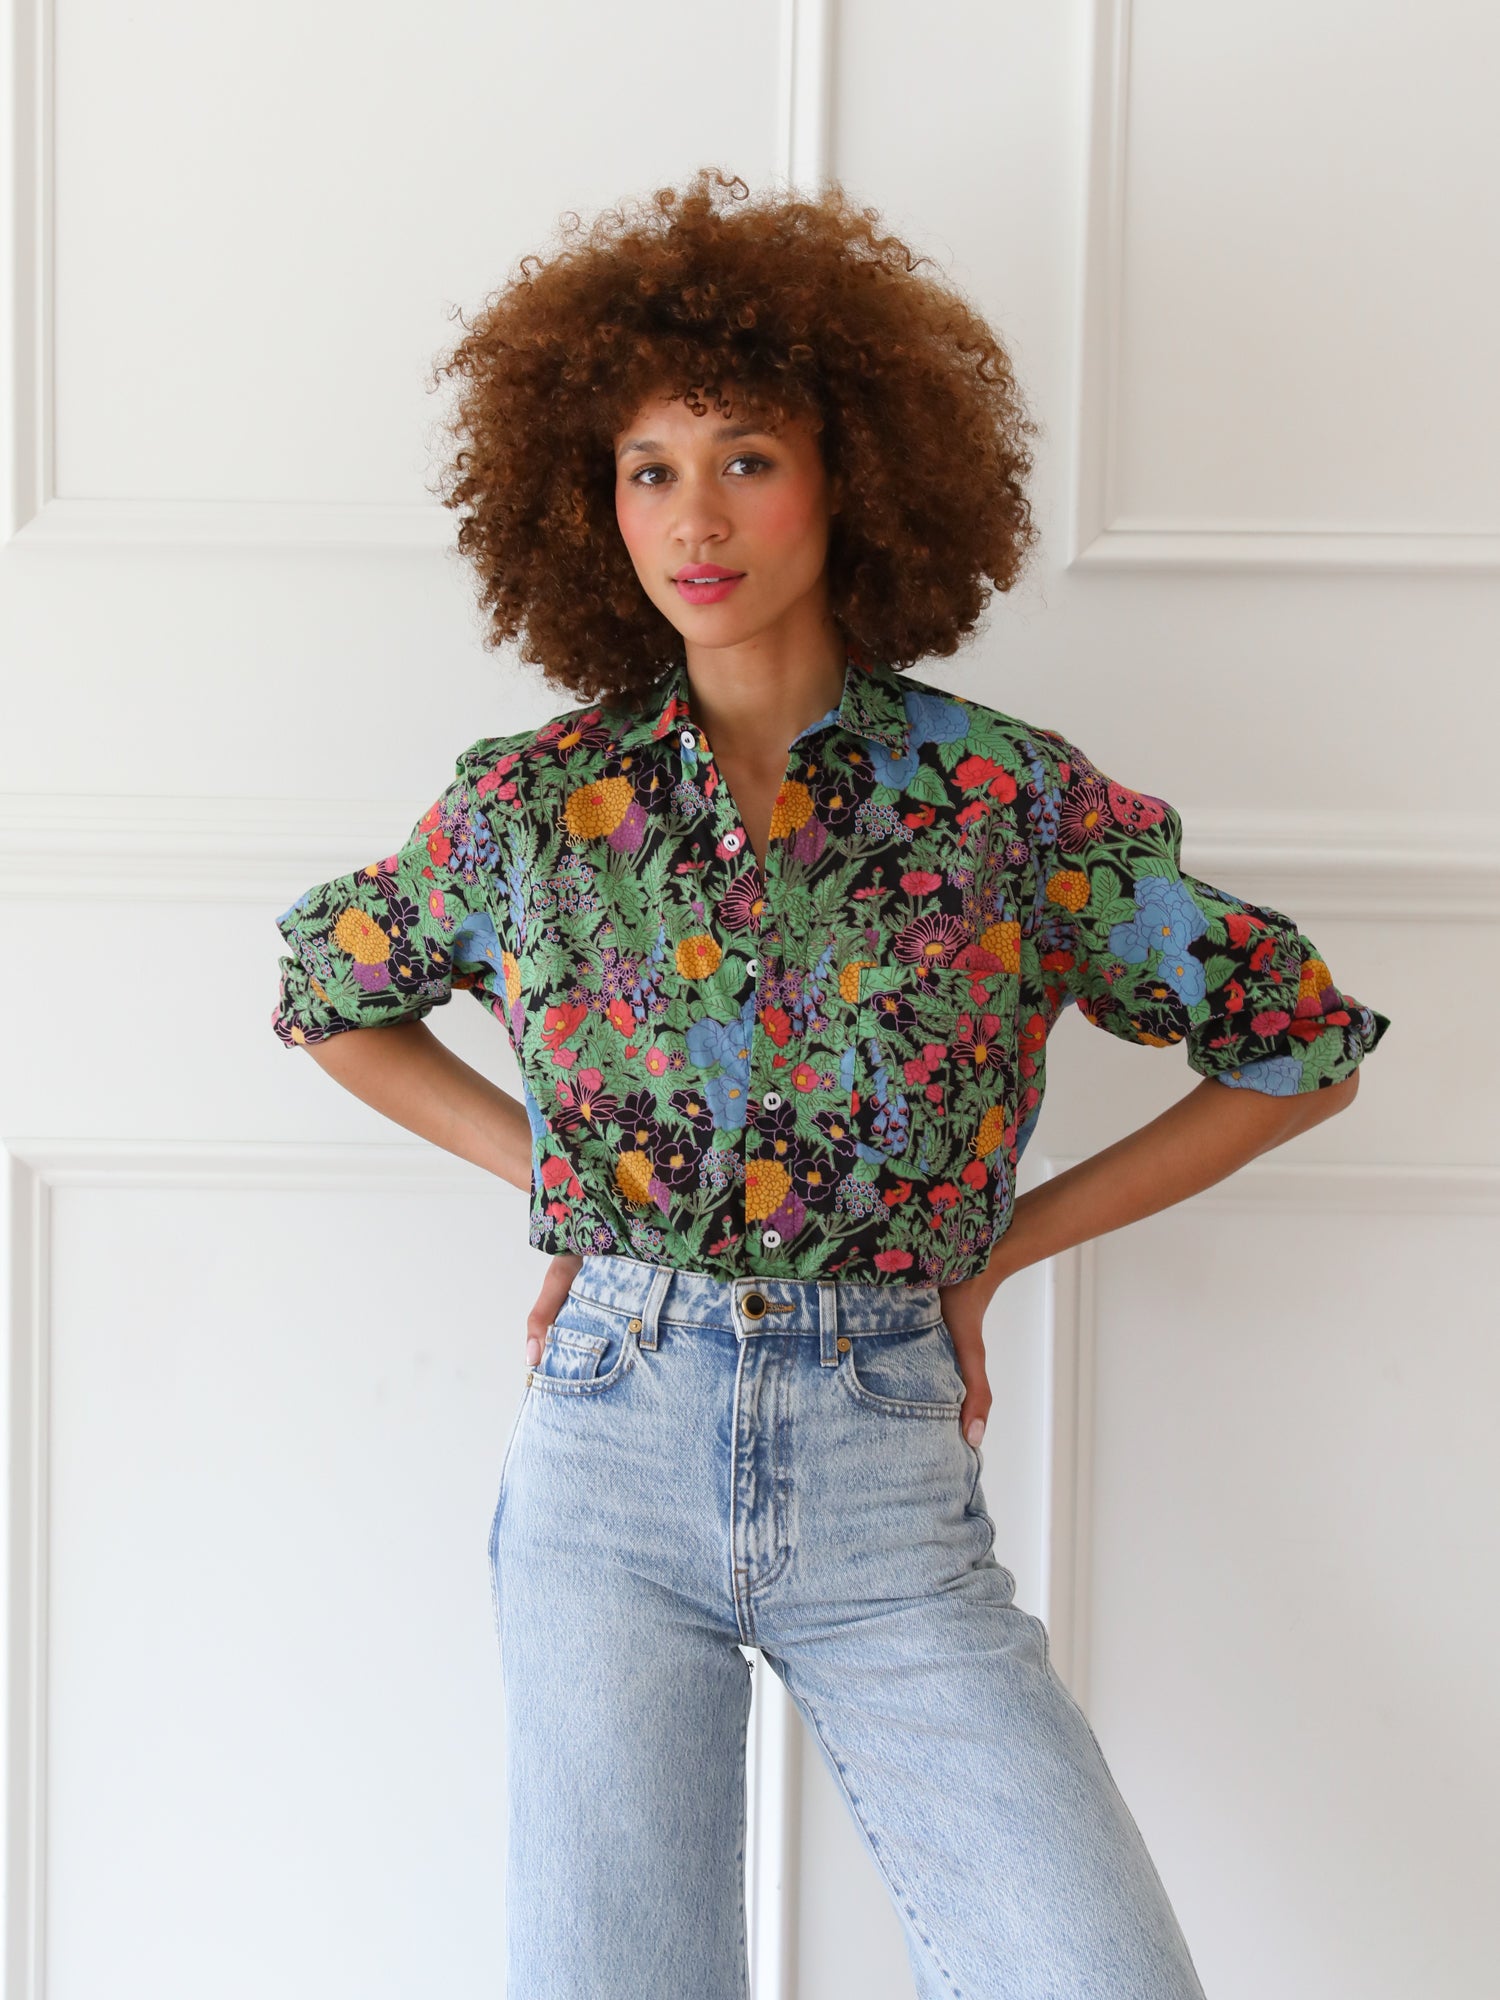 MILLE Clothing Sofia Top in Botanica